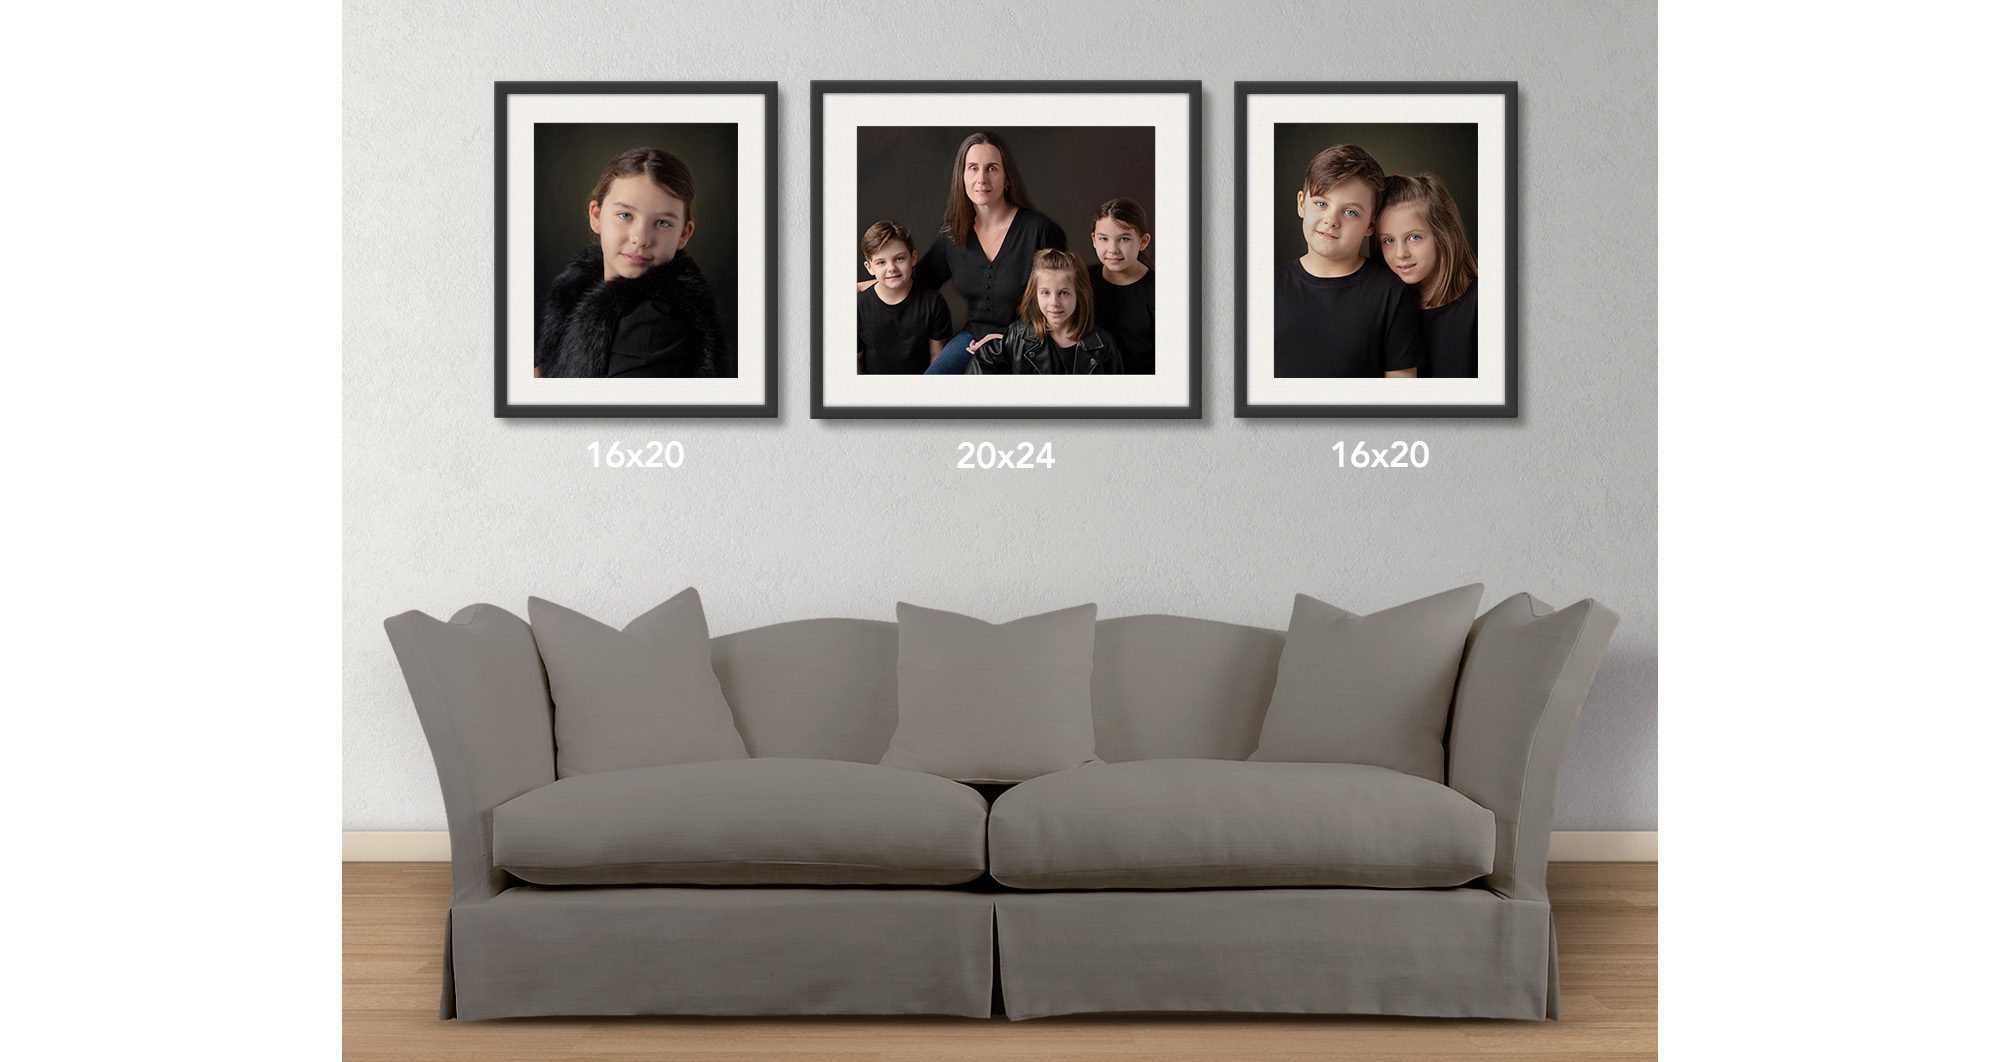 Fine Art Portraiture for your home